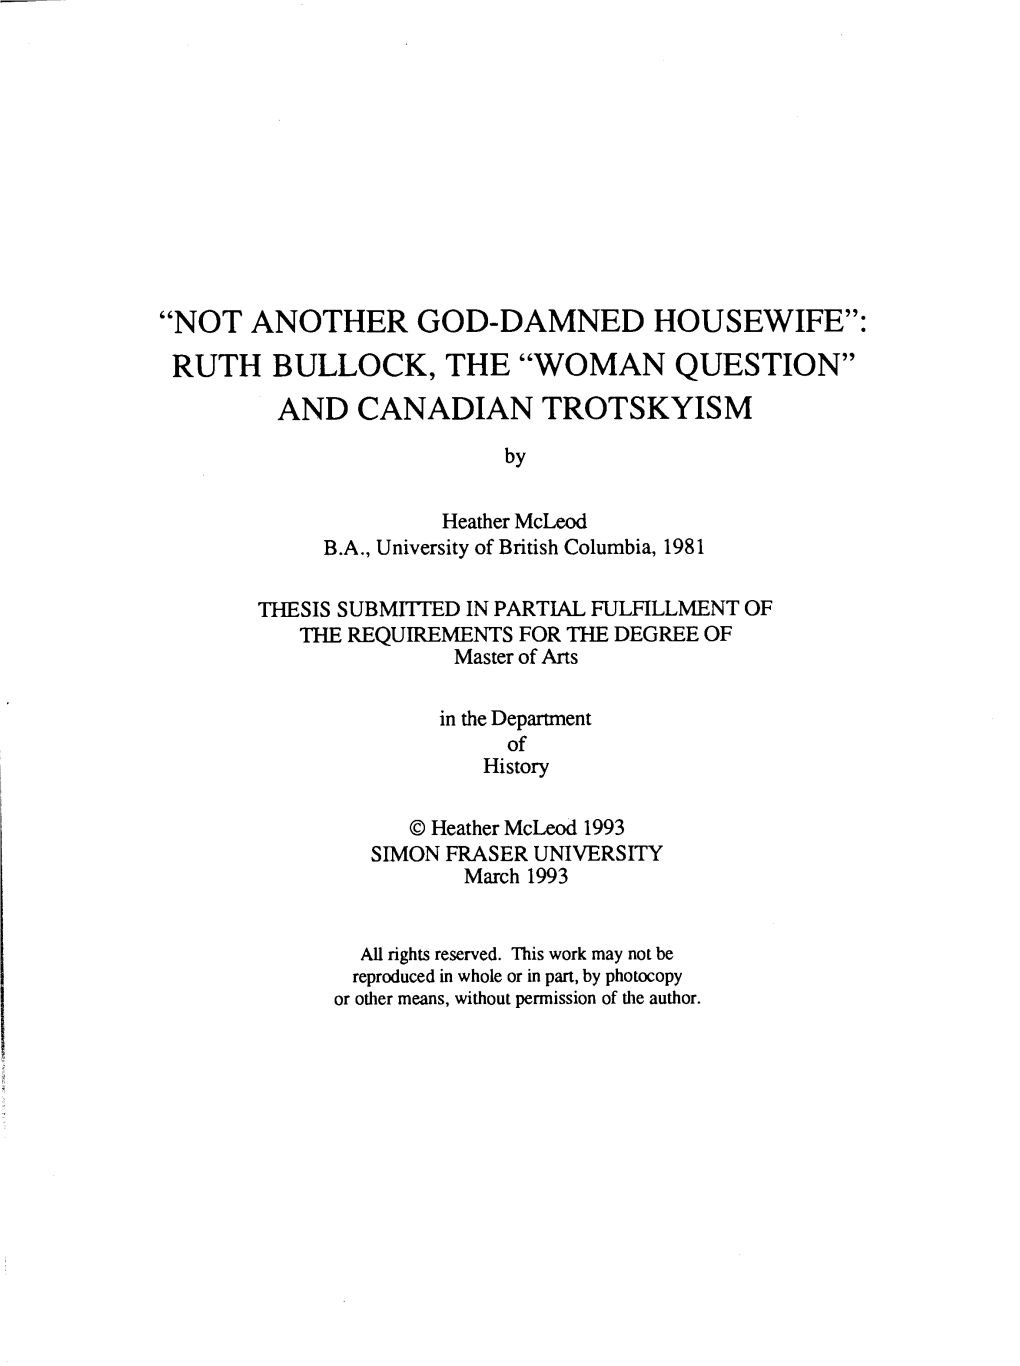 Ruth Bullock, the "Woman Question" and Canadian Trotskyism